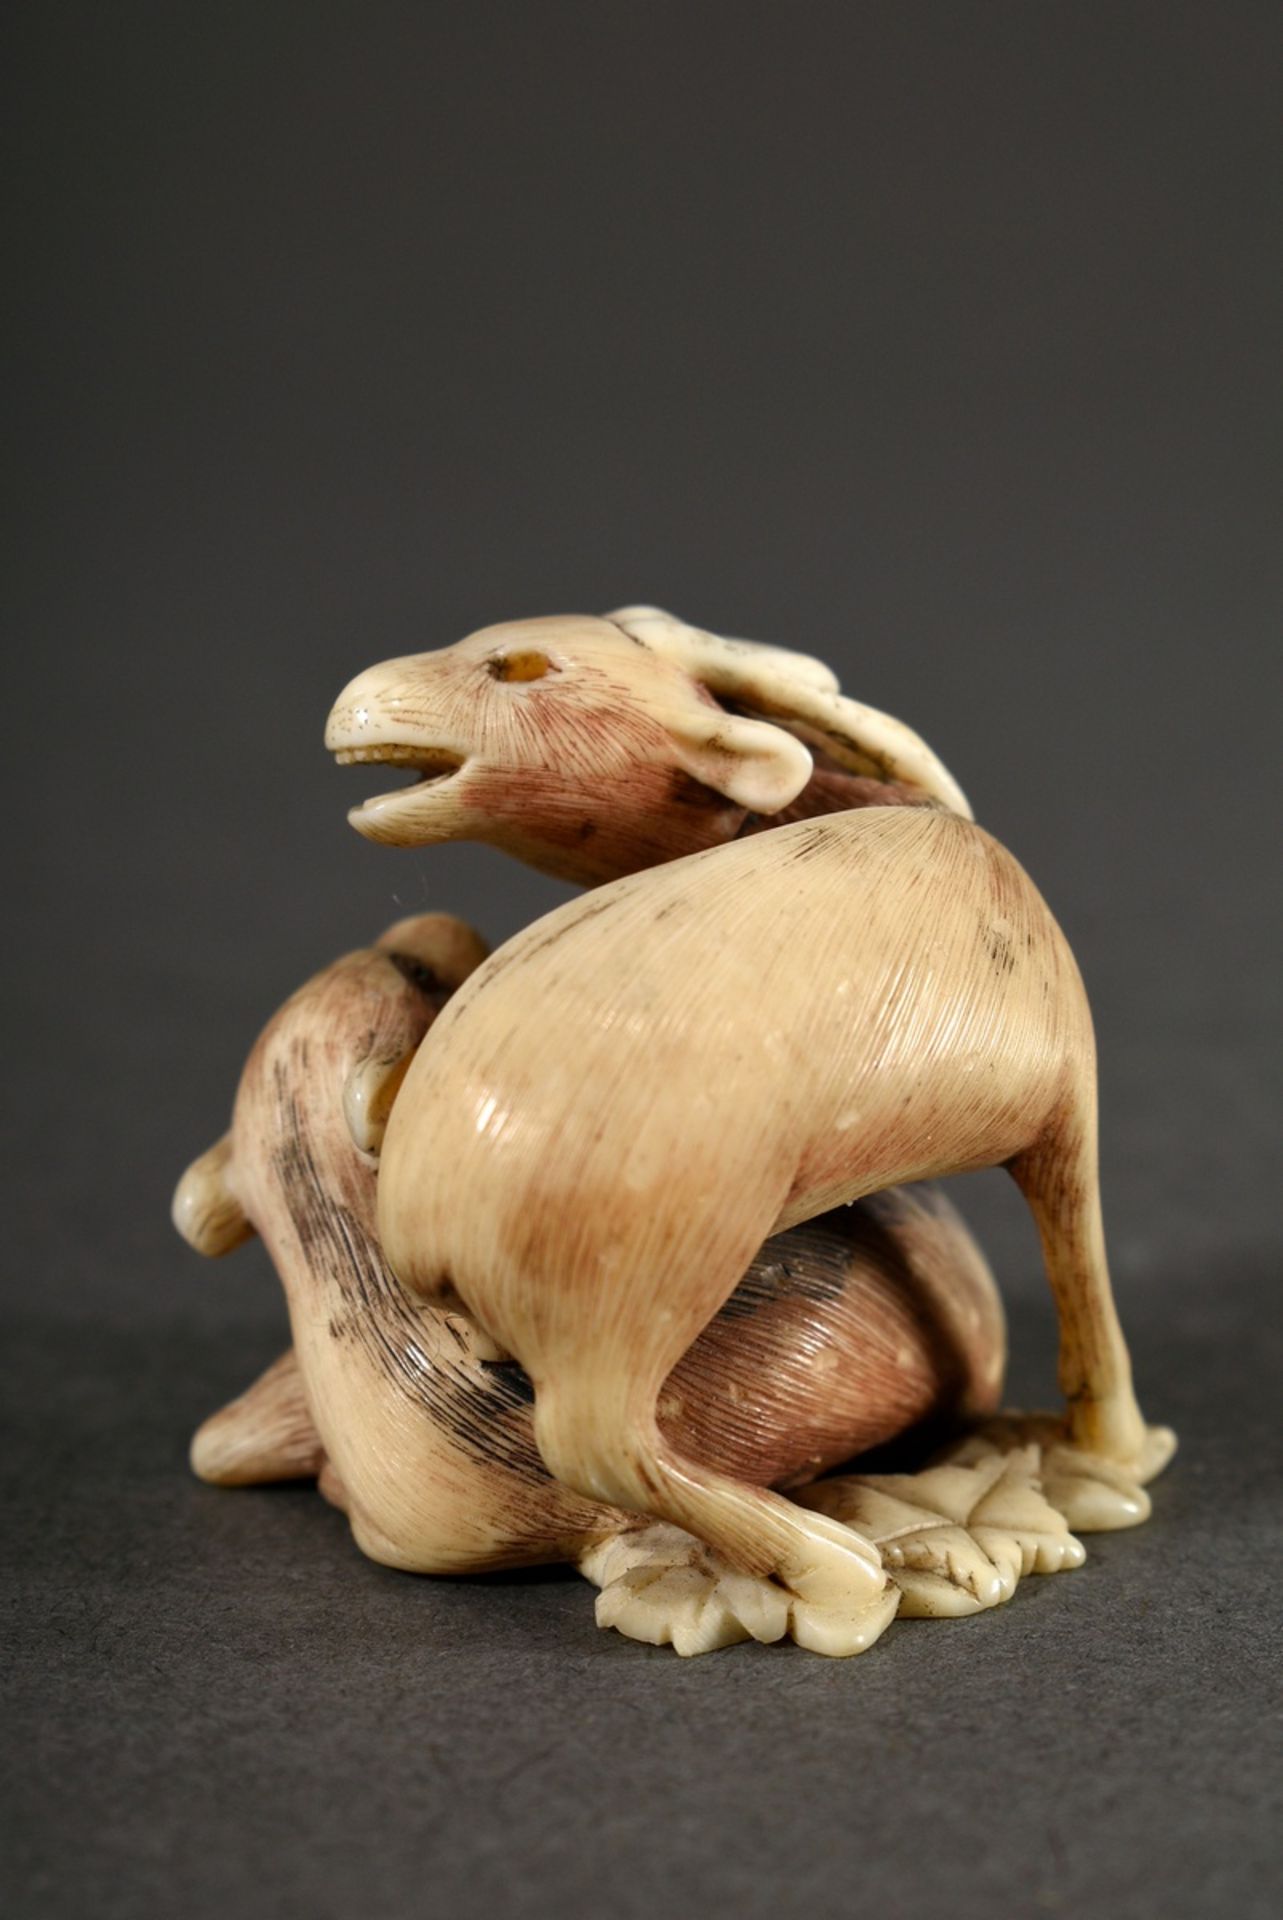 Ivory netsuke "Roaring deer with hind on maple foliage" with finely engraved and partially dyed fur - Image 3 of 7